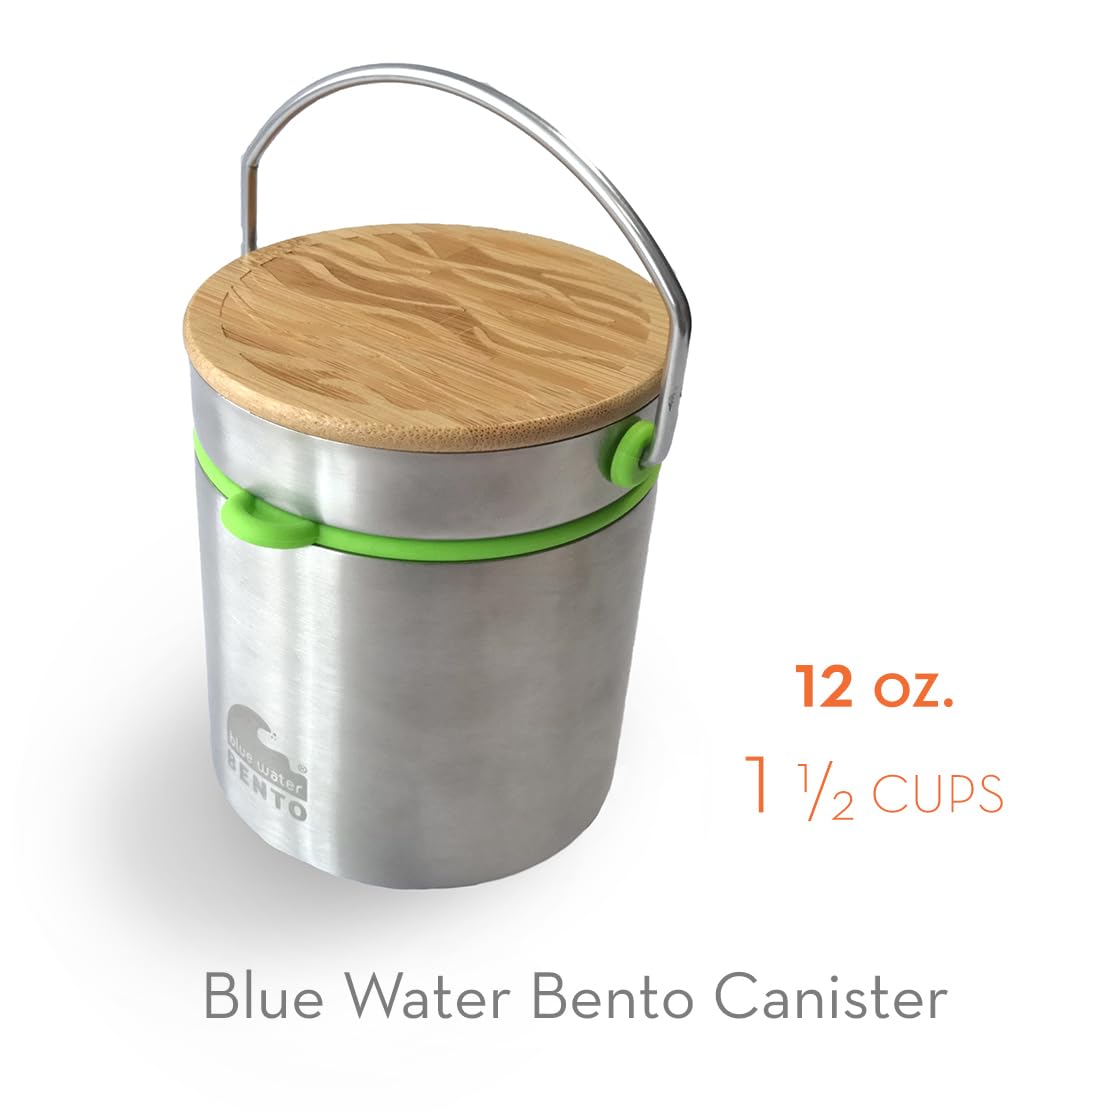 Ecolunchbox Vacuum Insulated Eco-Friendly Blue Water Bento Thermos Canister - Holds 1.5 Cups - Circular Design